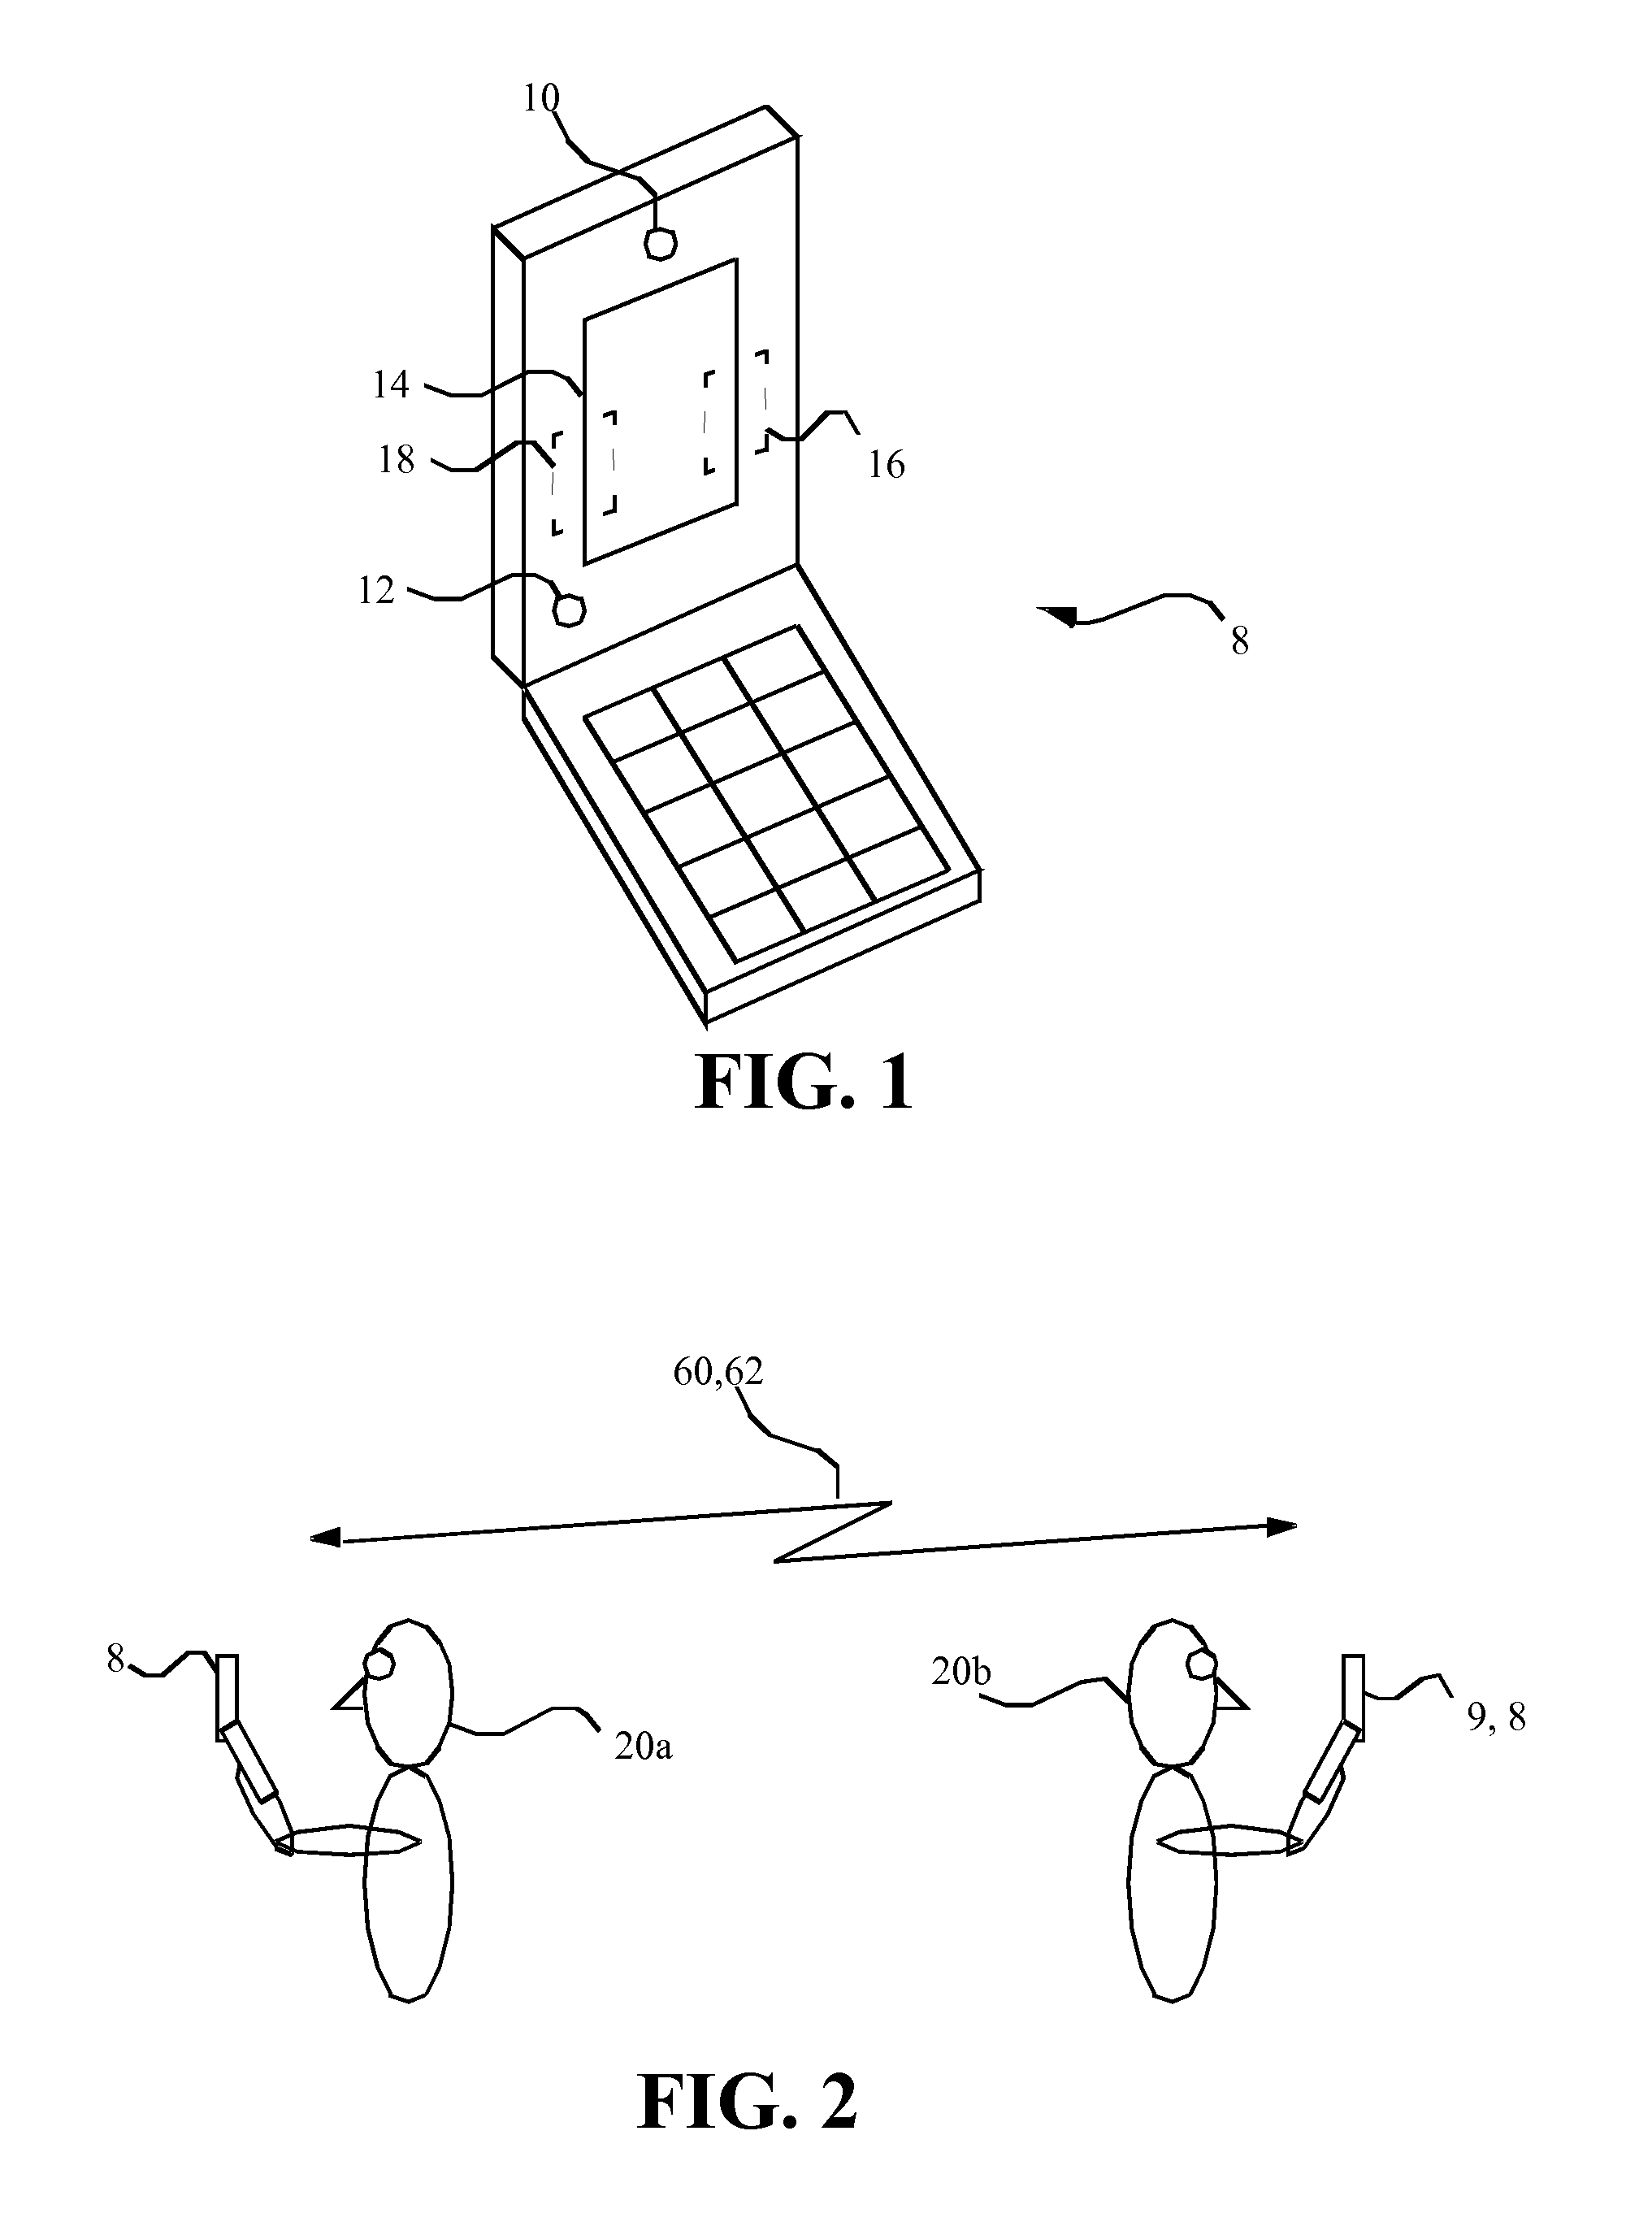 Image capture apparatus with indicator